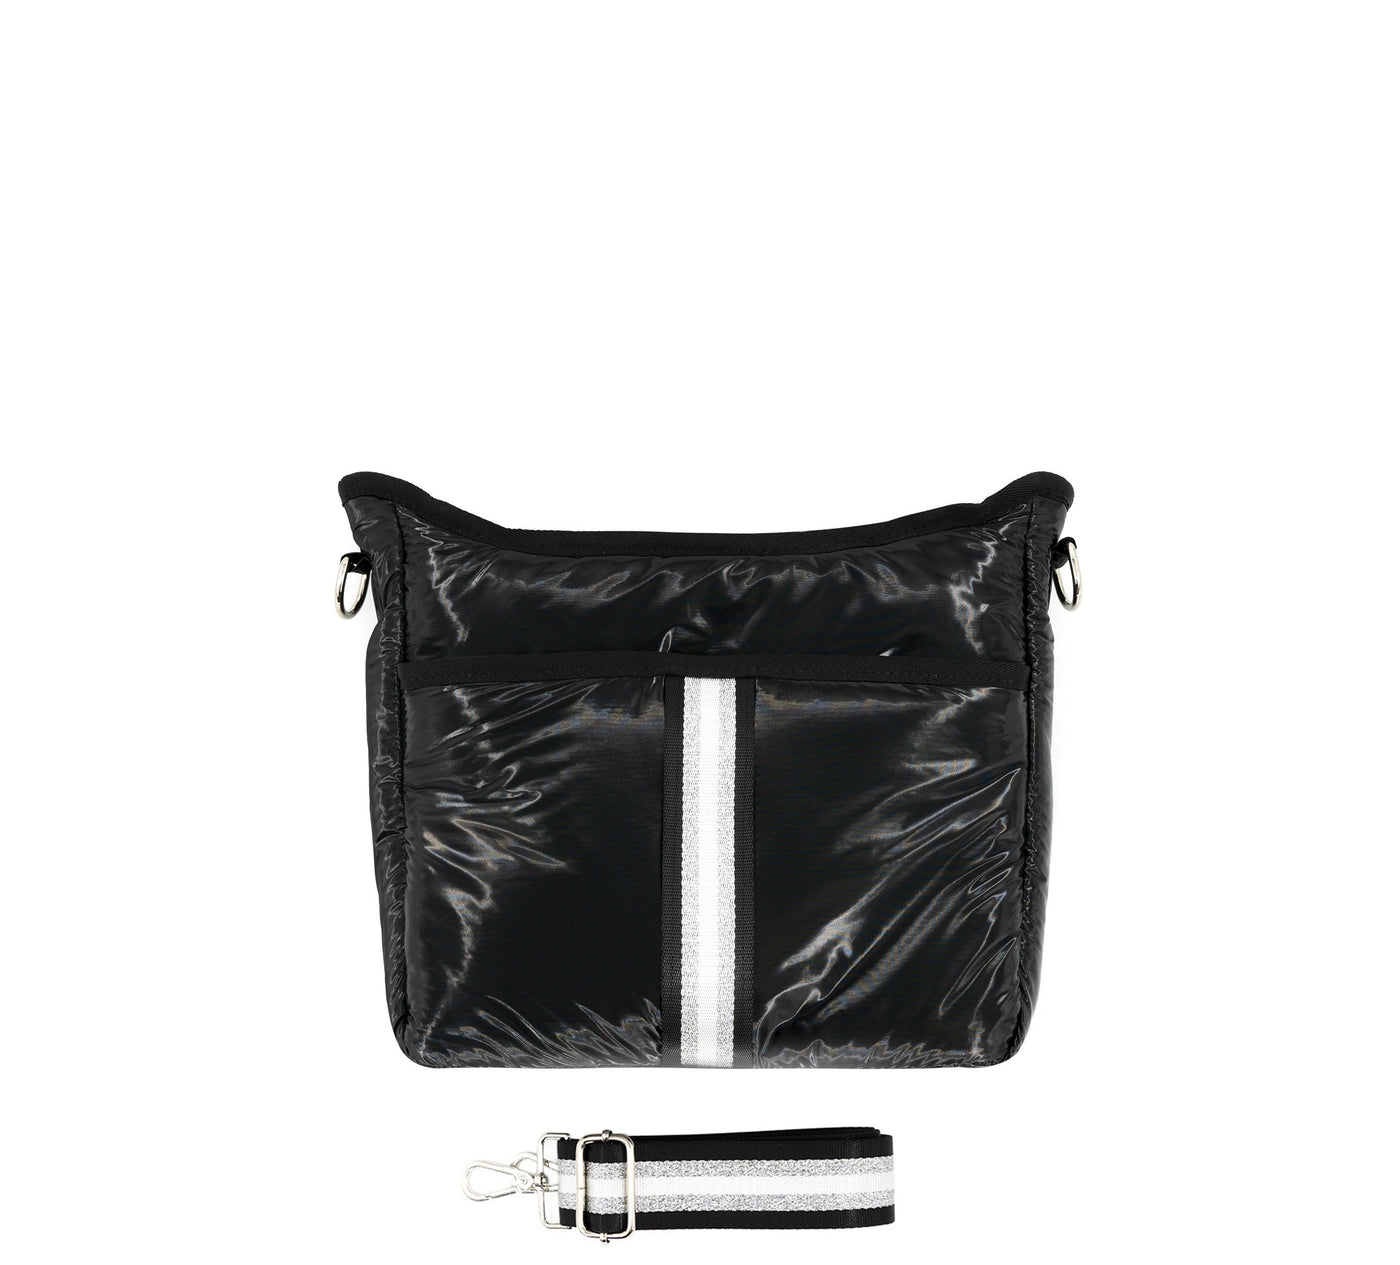 Puffy Nylon Crossbody with Changeable Strap - Black